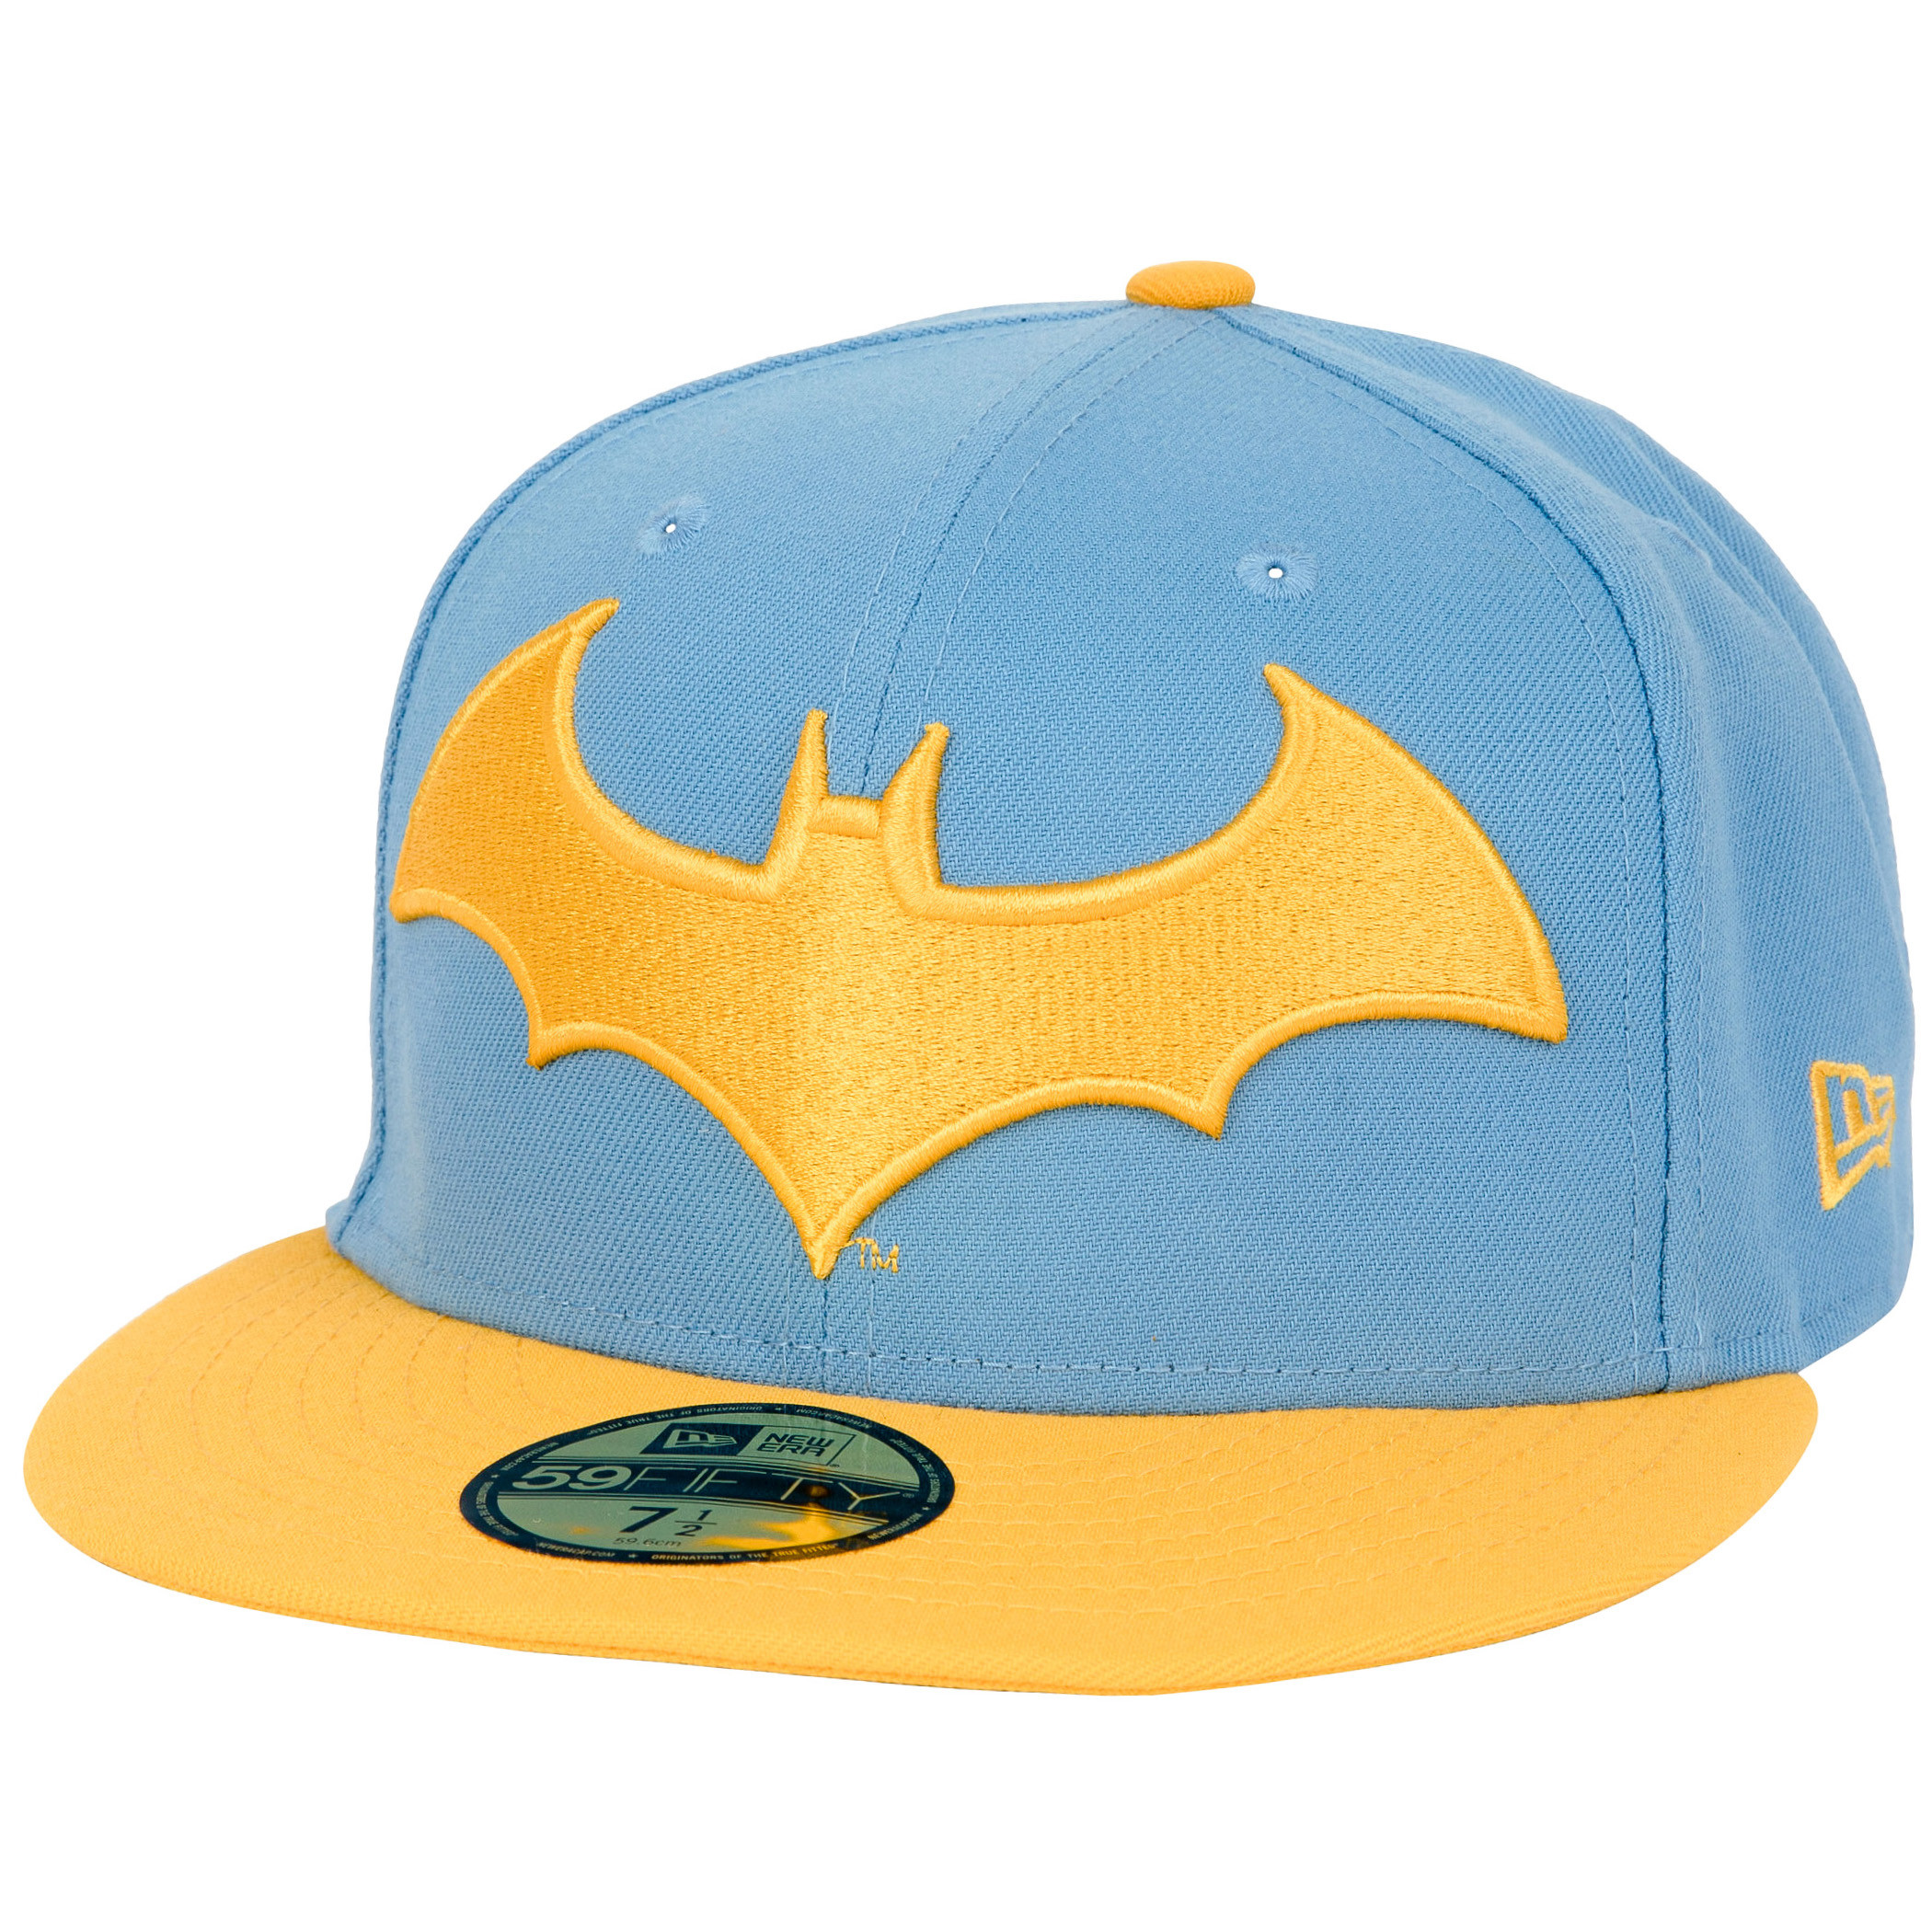 Batman Hush Blue and Yellow Colorway New Era 59Fifty Fitted Hat